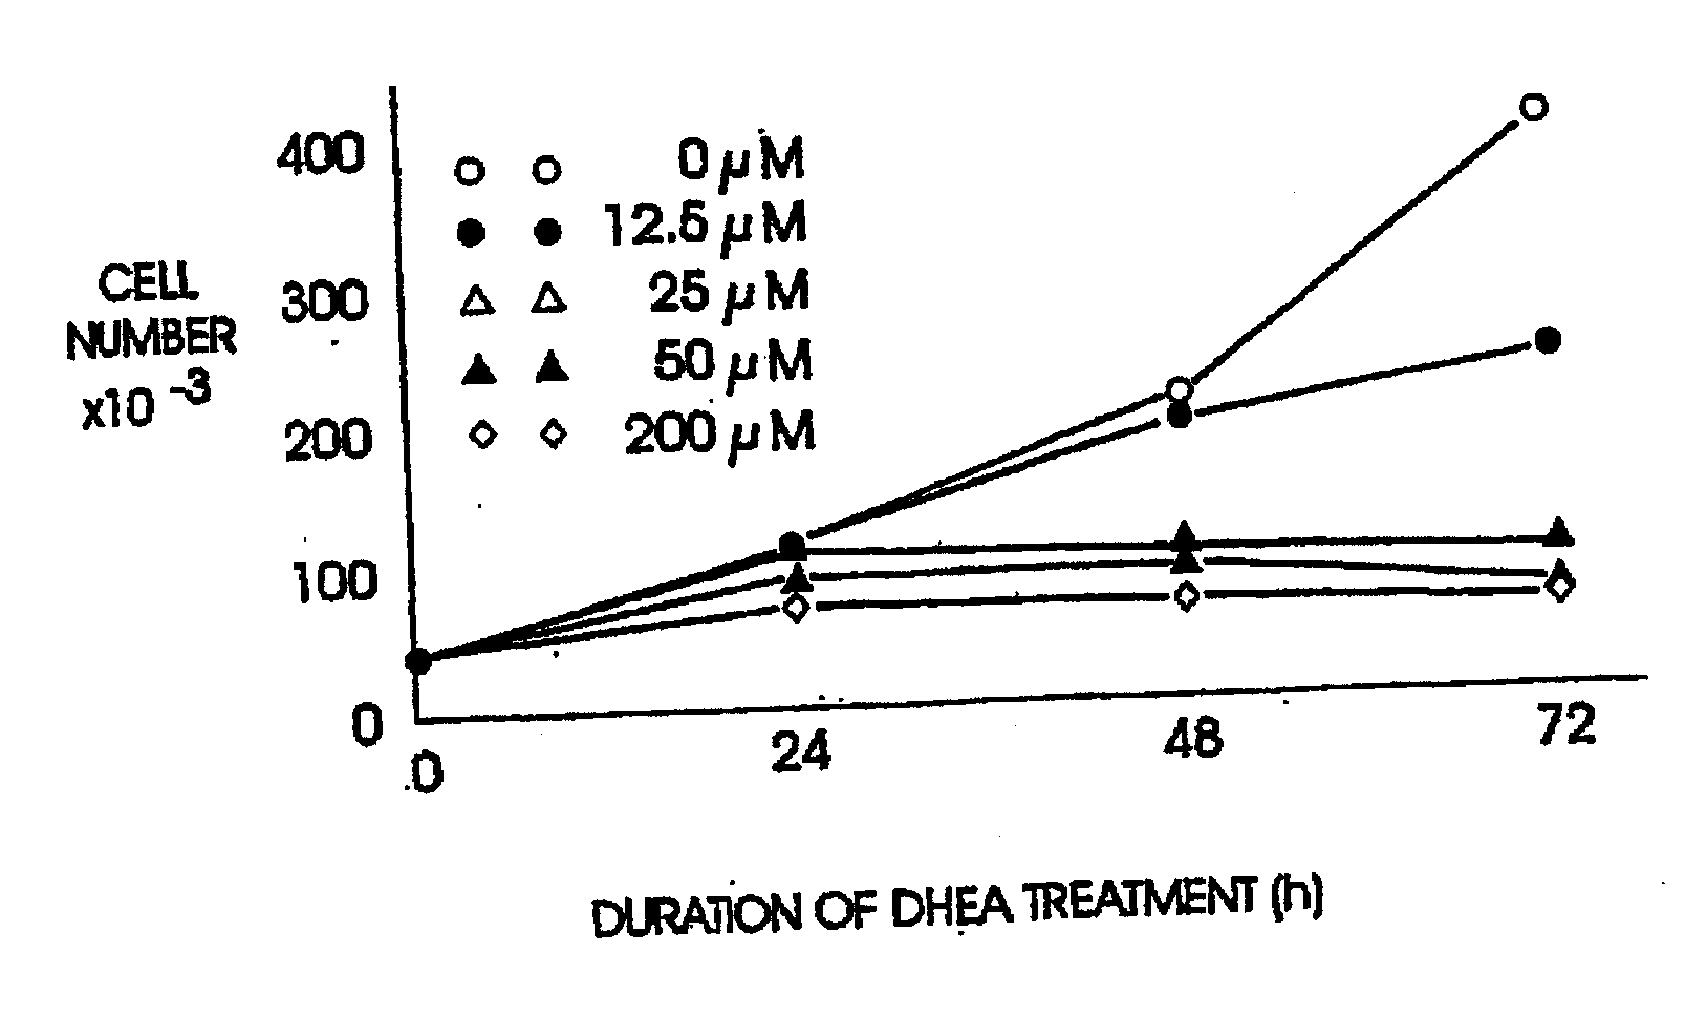 Kits for dhea and dhea-sulfate for the treatment of chronic obstructive pulmonary disease